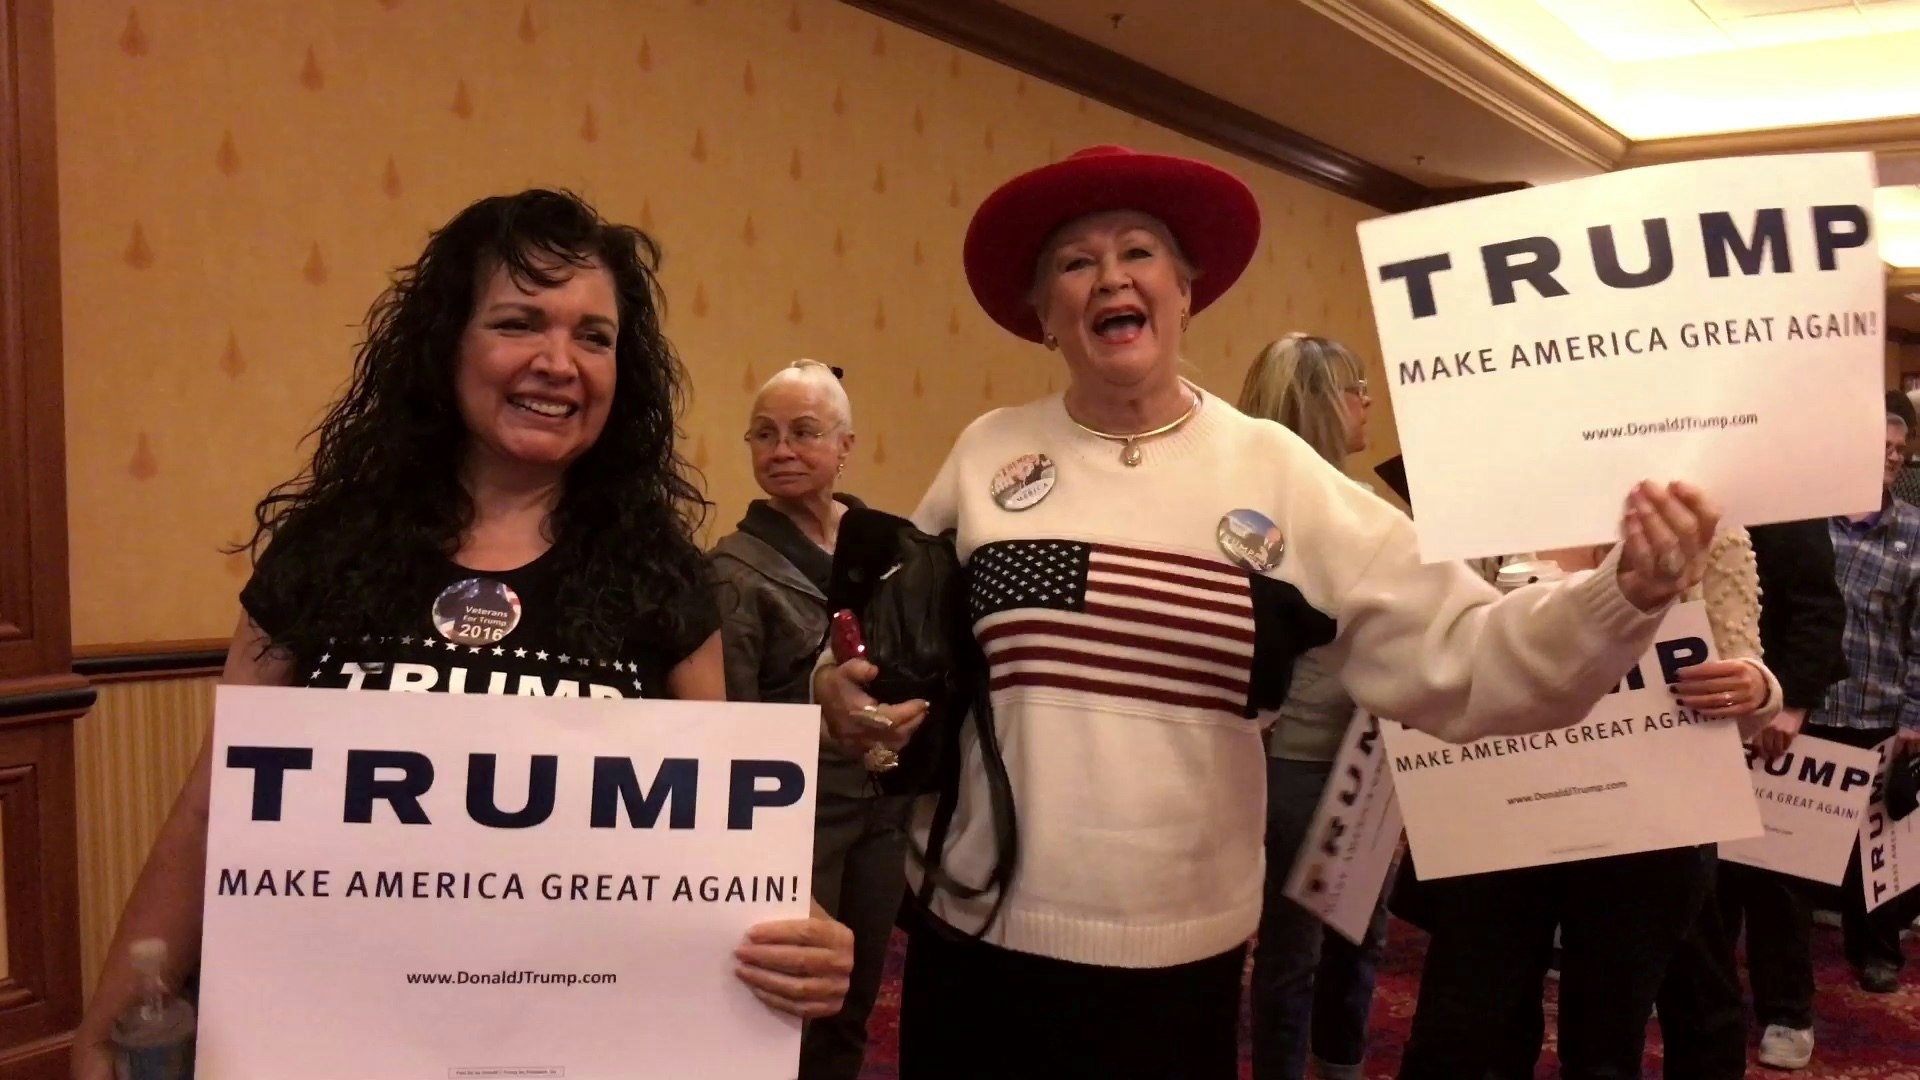 What the hell is going on at Donald Trump’s rallies?